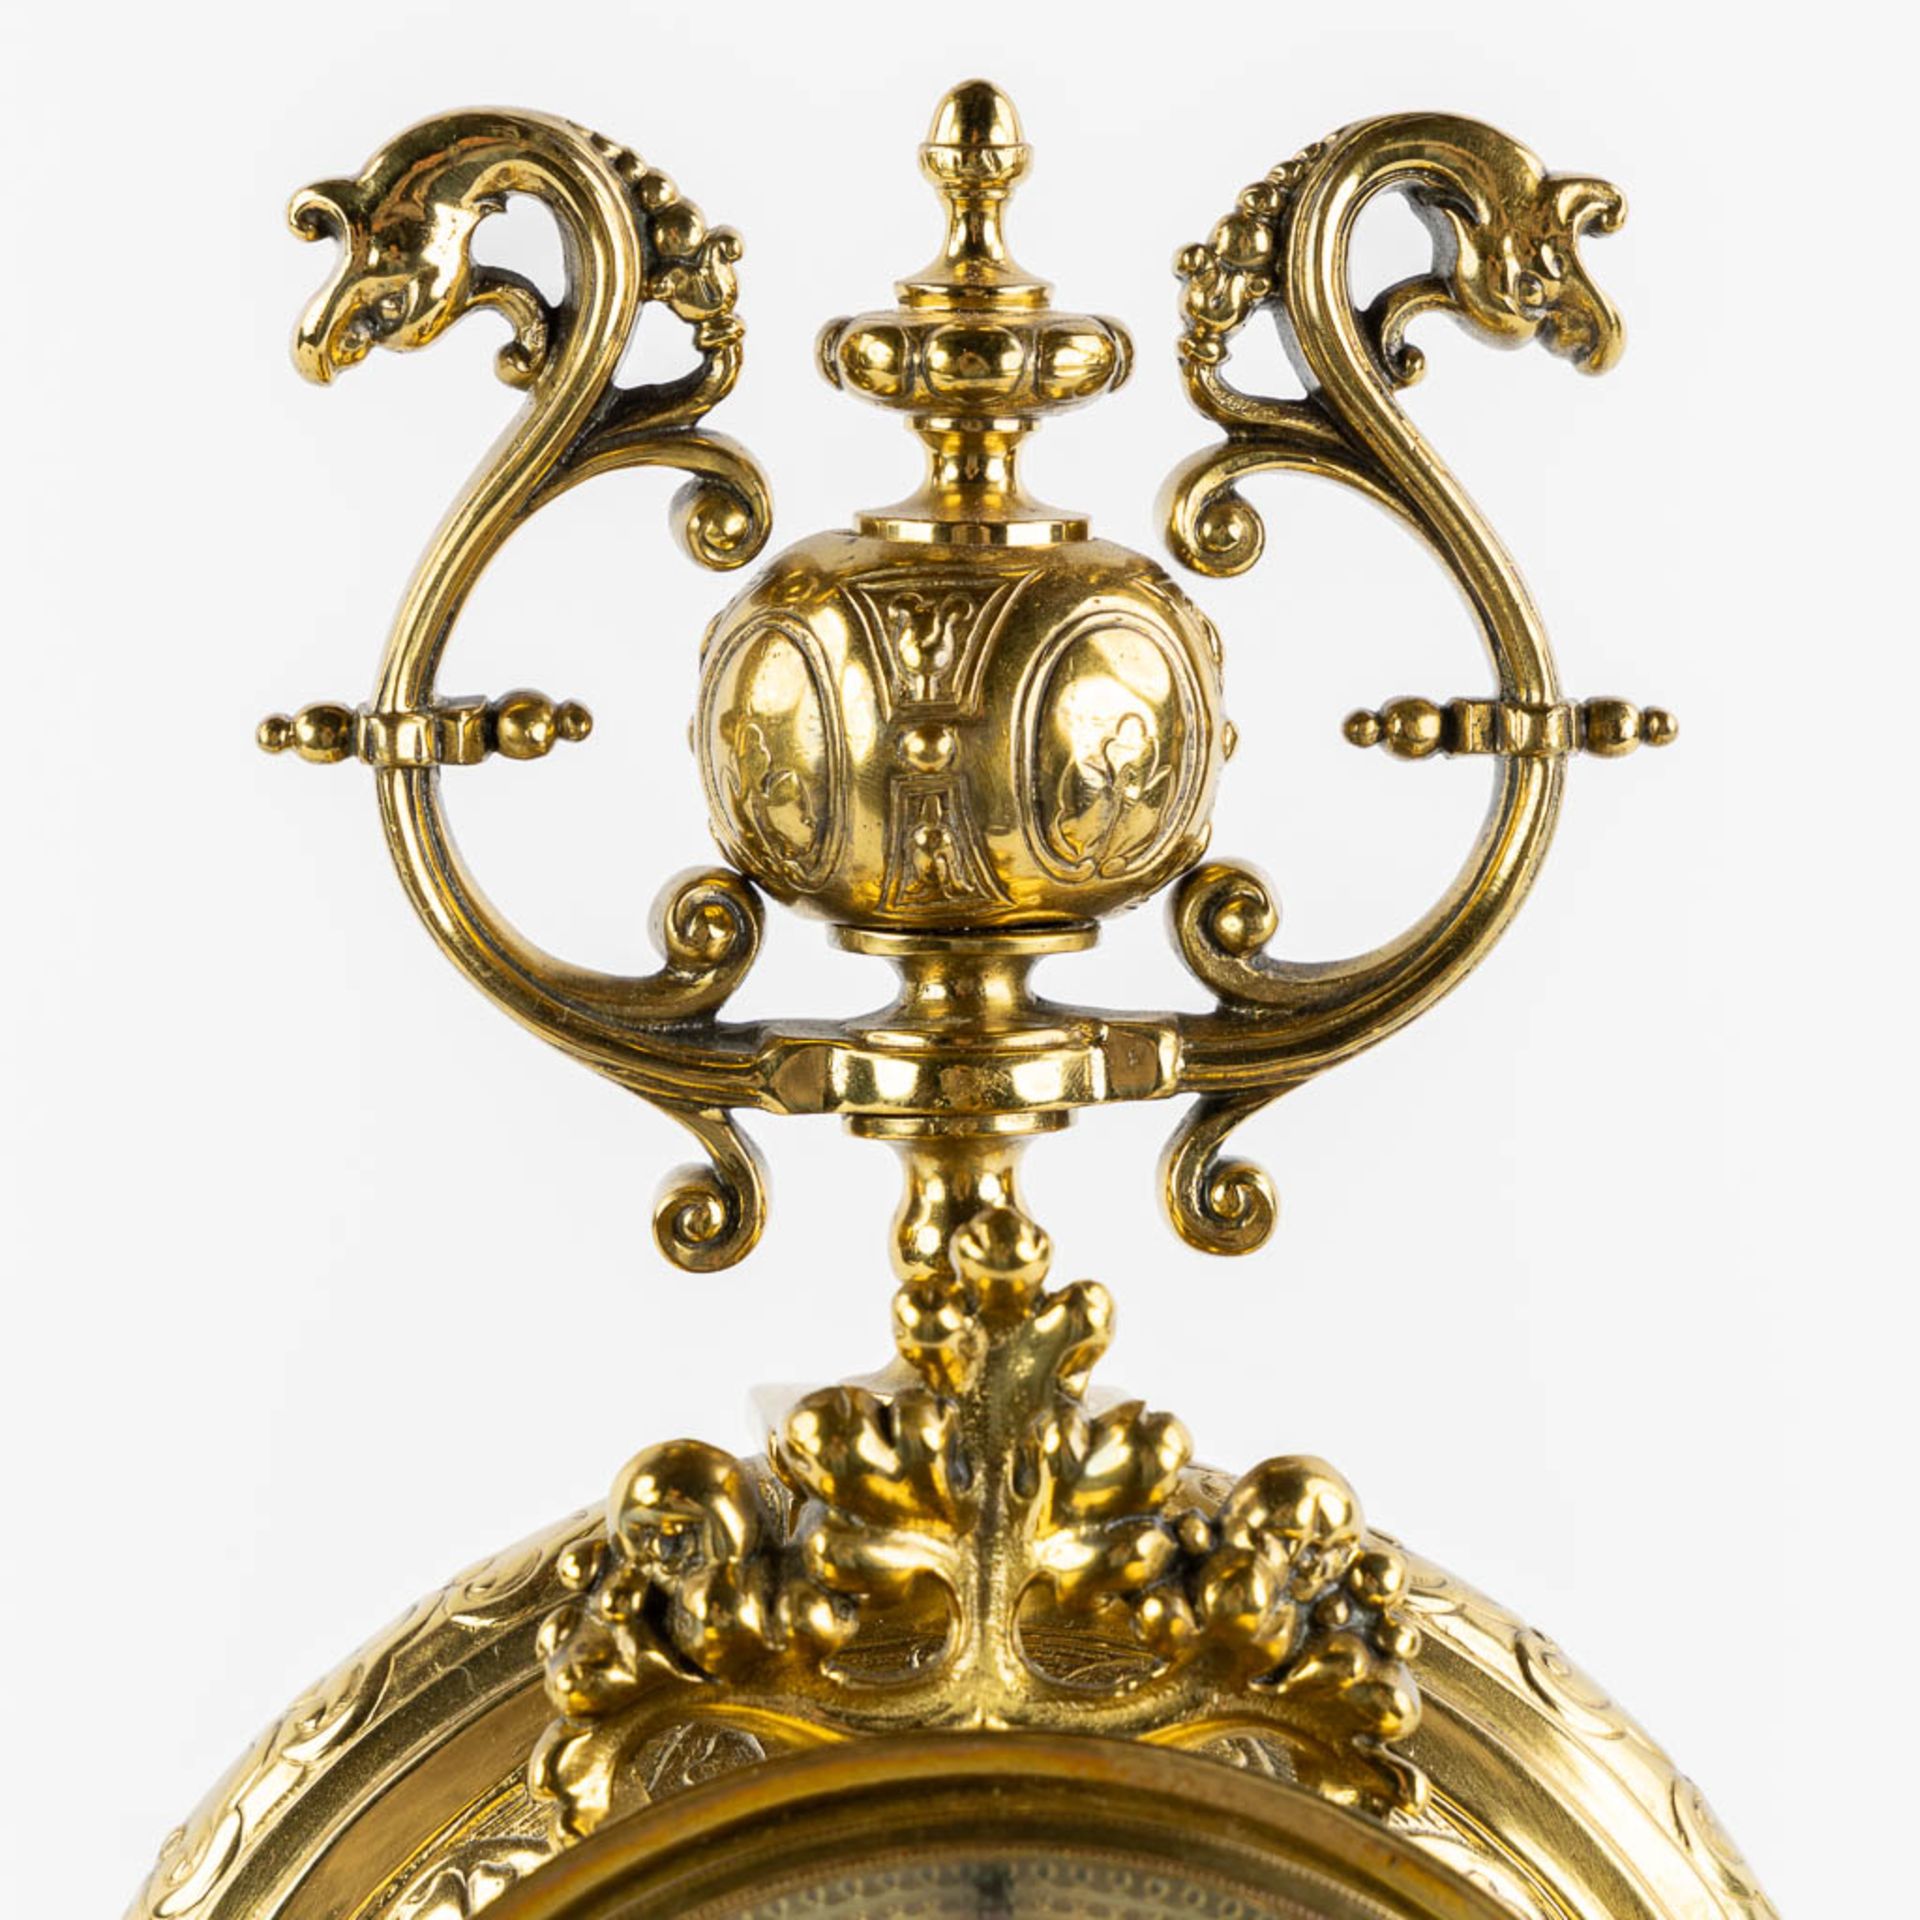 A mantle clock, polished bronze, decorated with Mythological Figures. Circa 1880. (L:15 x W:26 x H:4 - Image 7 of 12